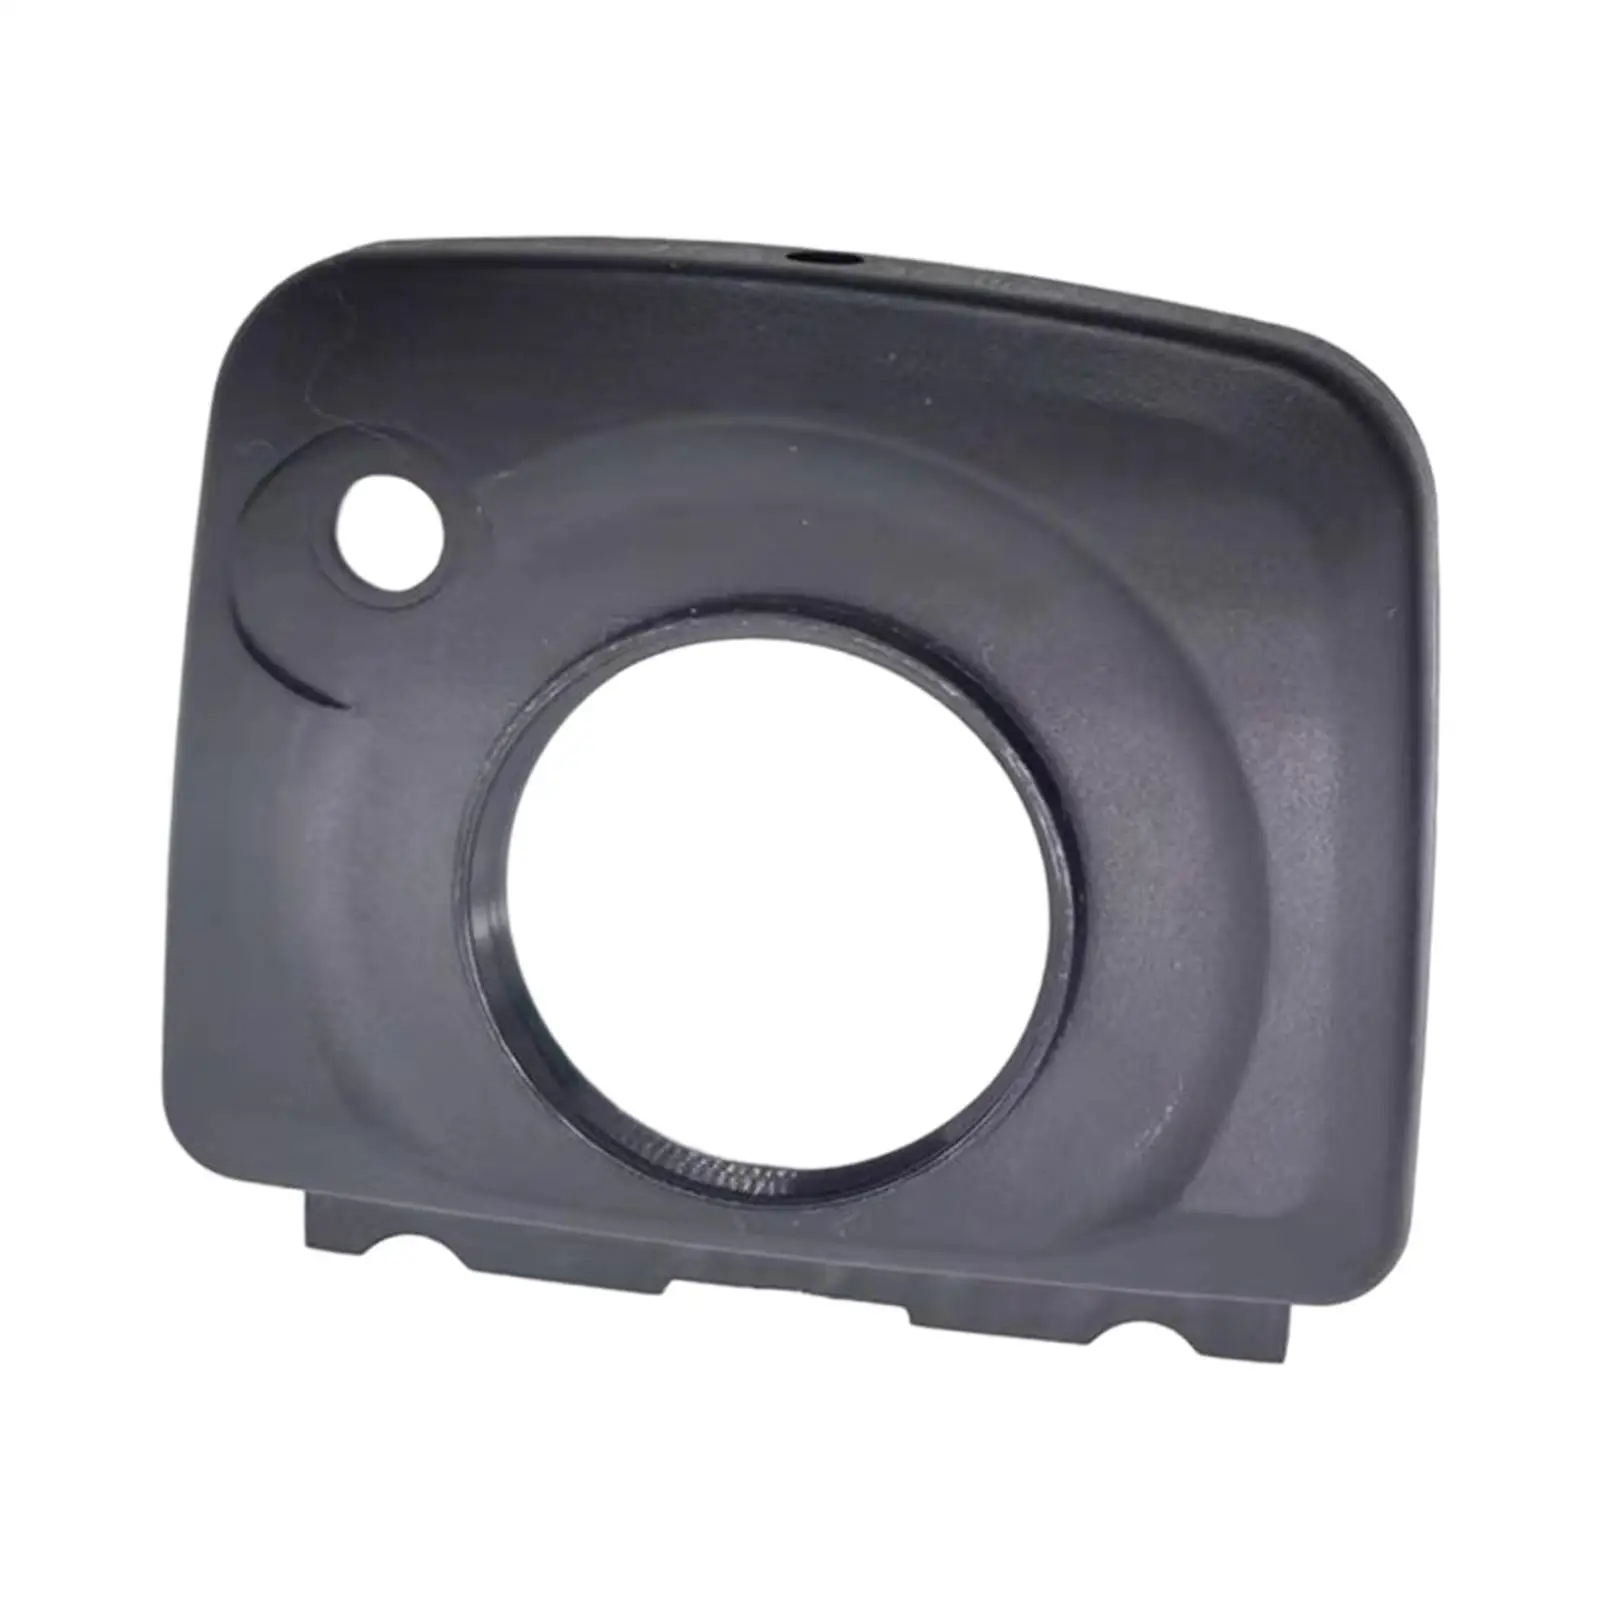 Professional Viewfinder Frame Accessory Black Durable Eyepiece Cover for D810 Camera Repair Part